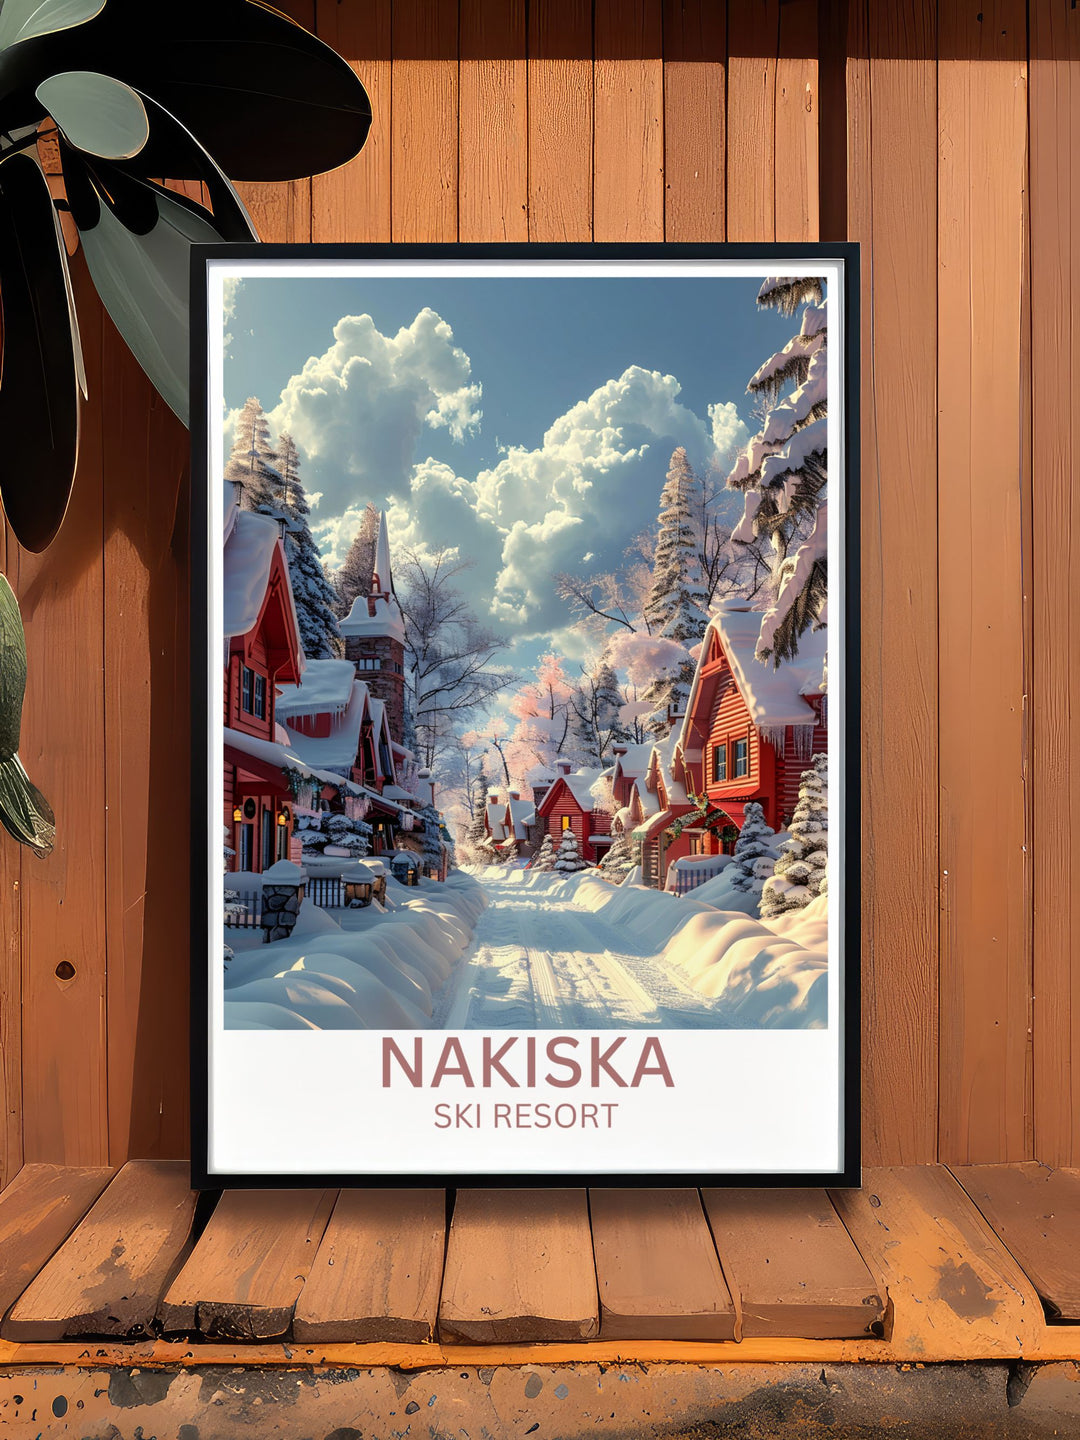 Elegant artwork featuring the serene mornings at Nakiska, with skiers preparing for the days adventures.